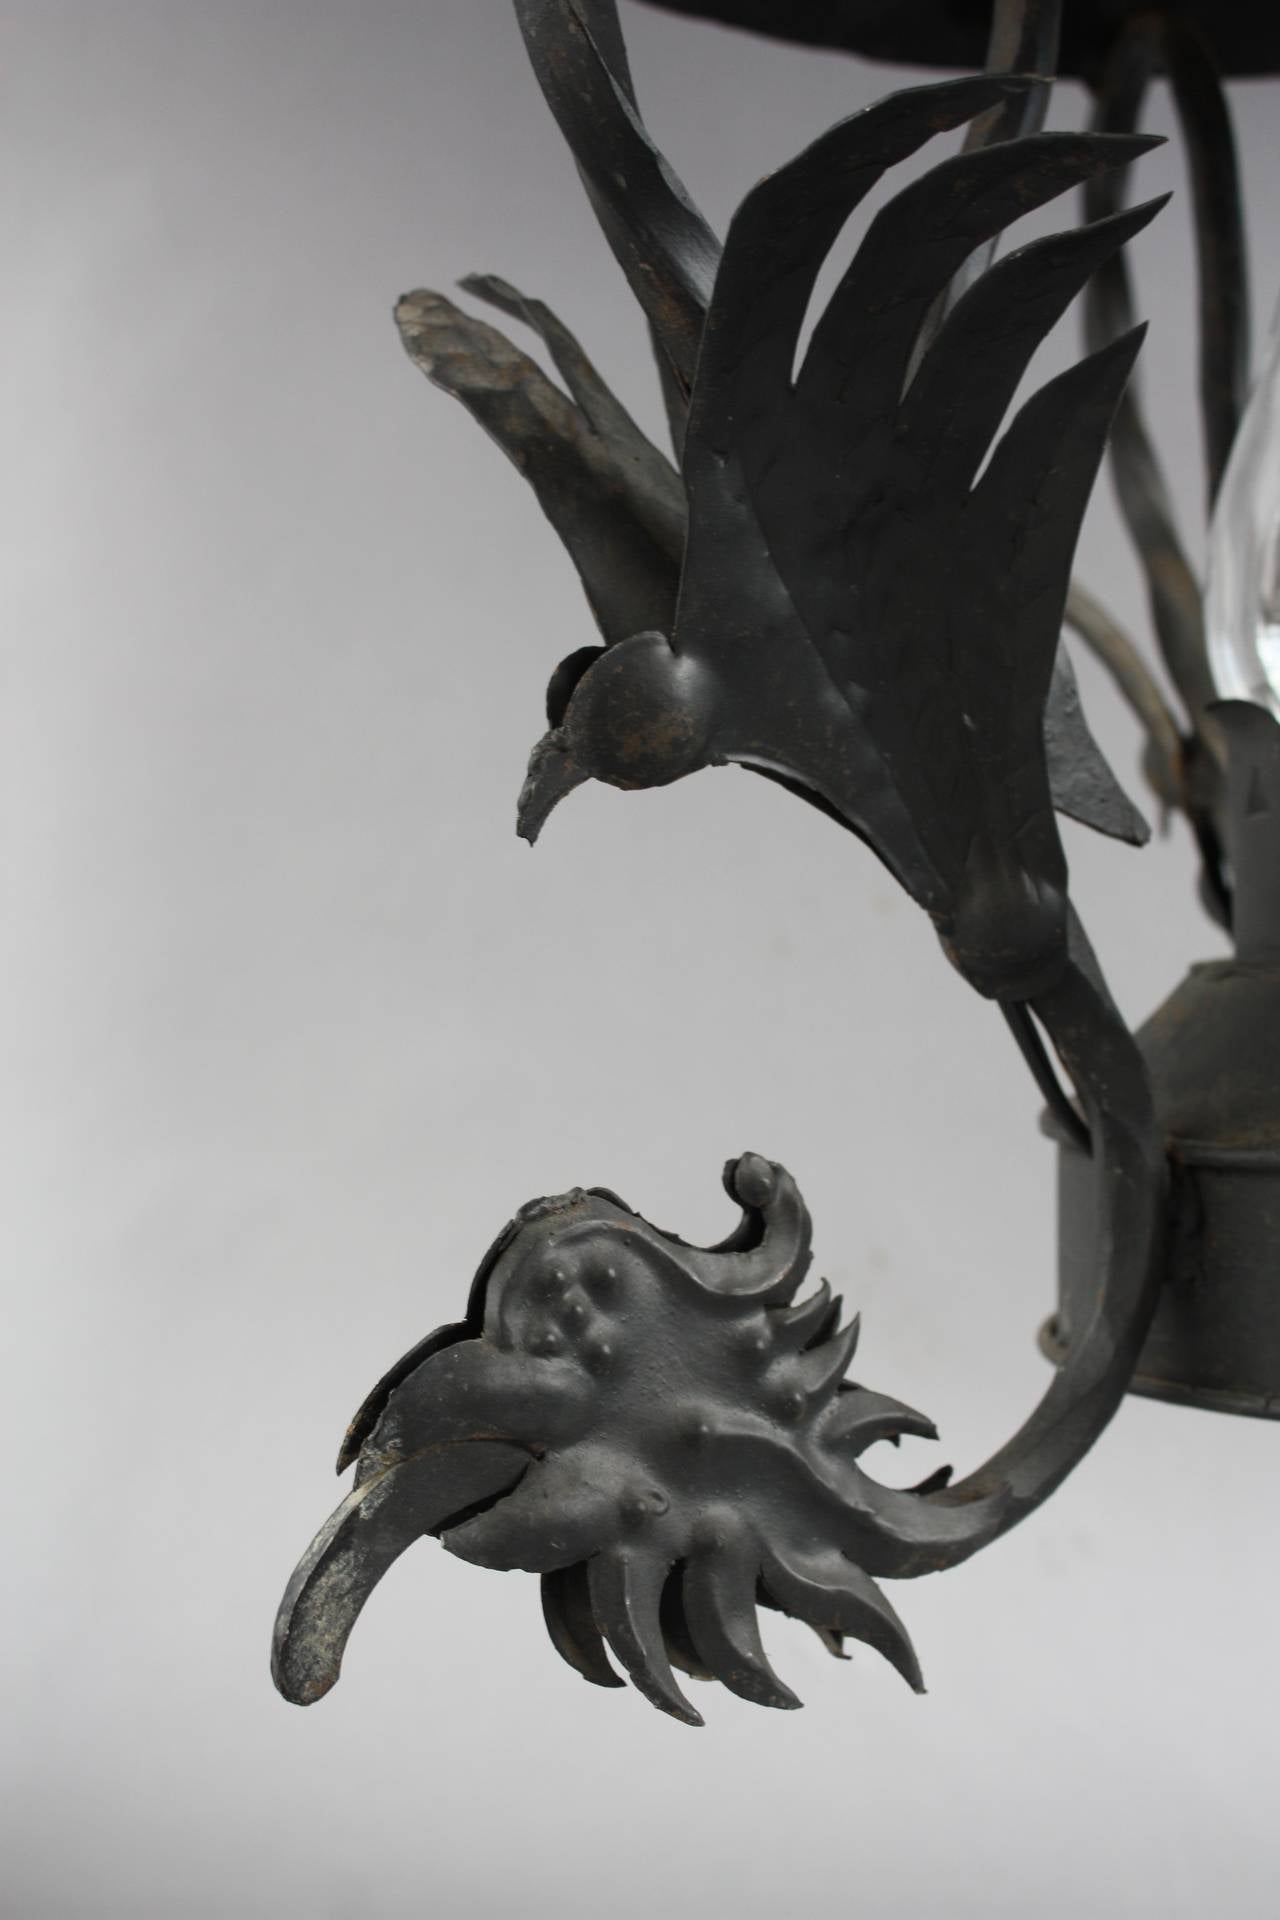 North American Wonderful Wrought Iron Fixture with Griffin Motif